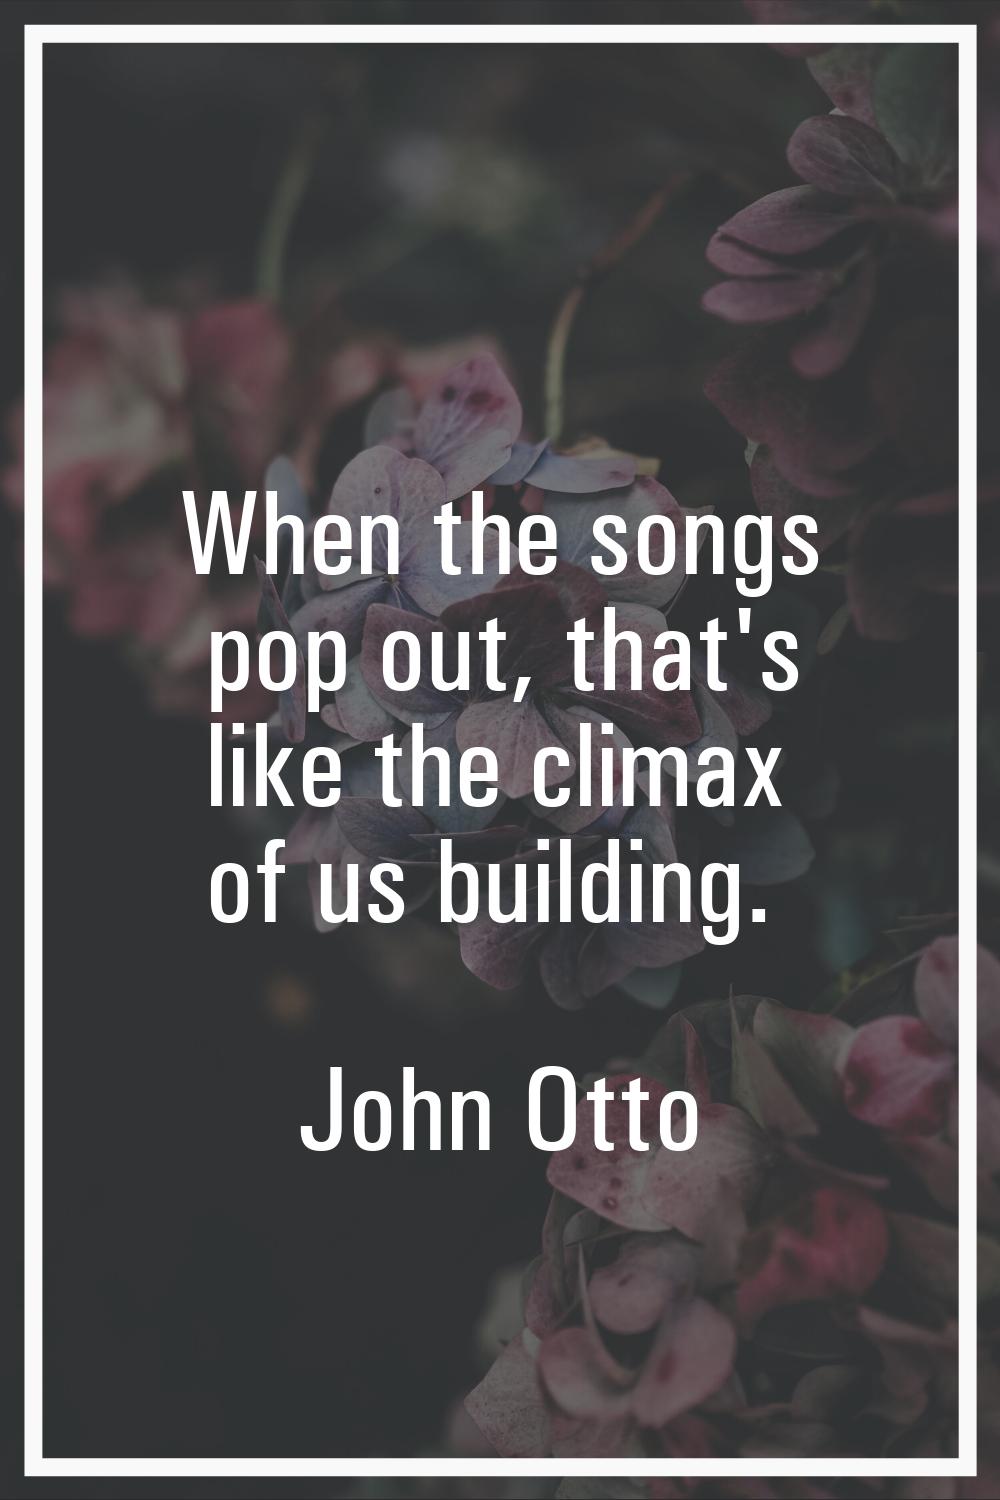 When the songs pop out, that's like the climax of us building.